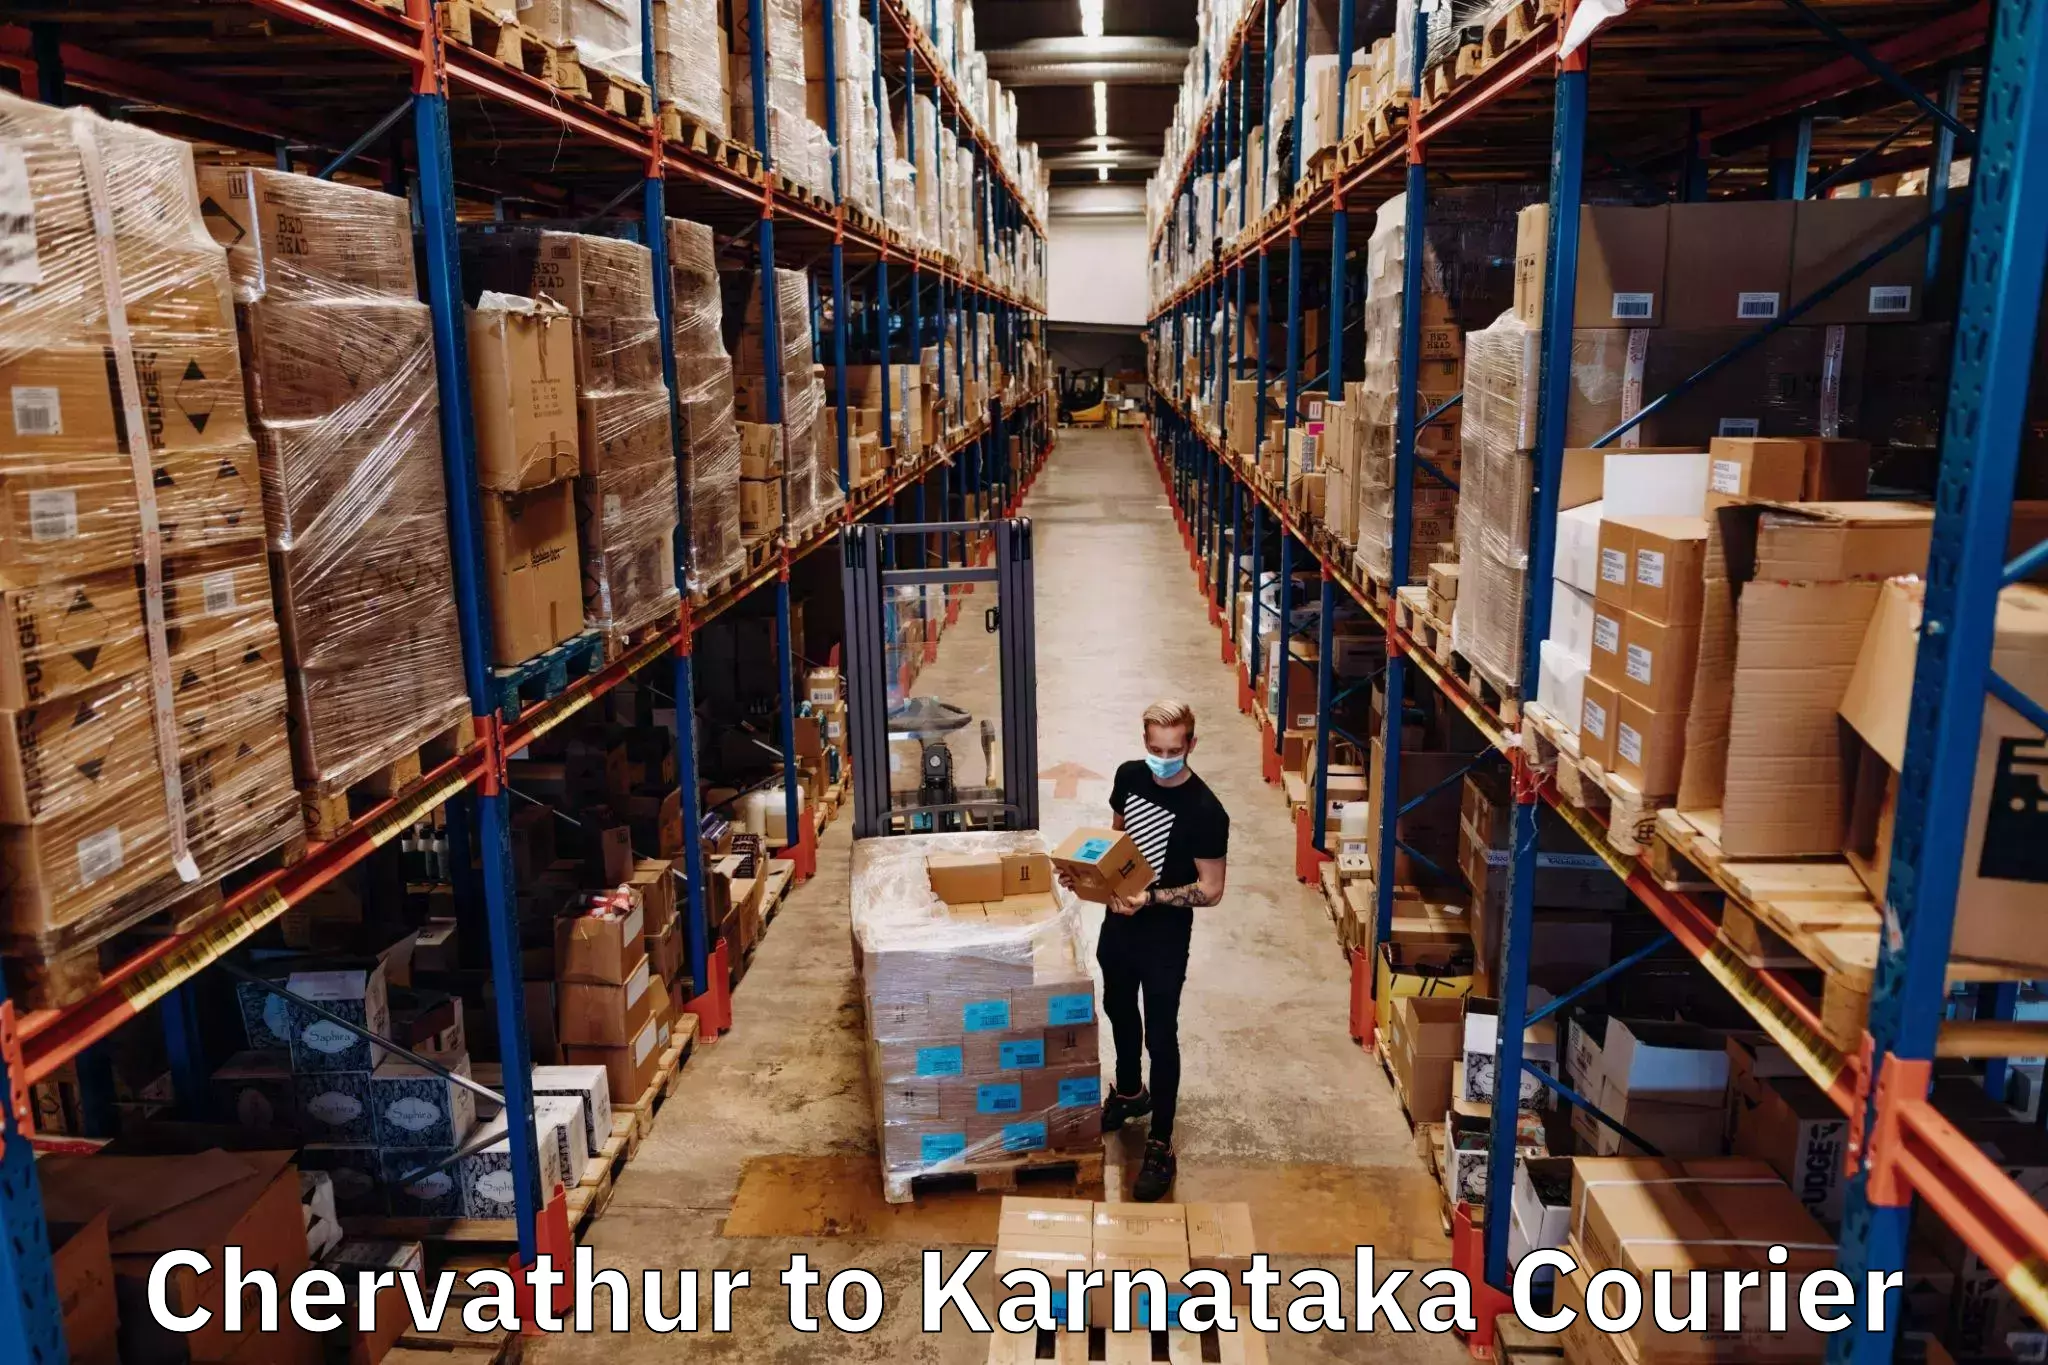 Express delivery capabilities Chervathur to Karnataka